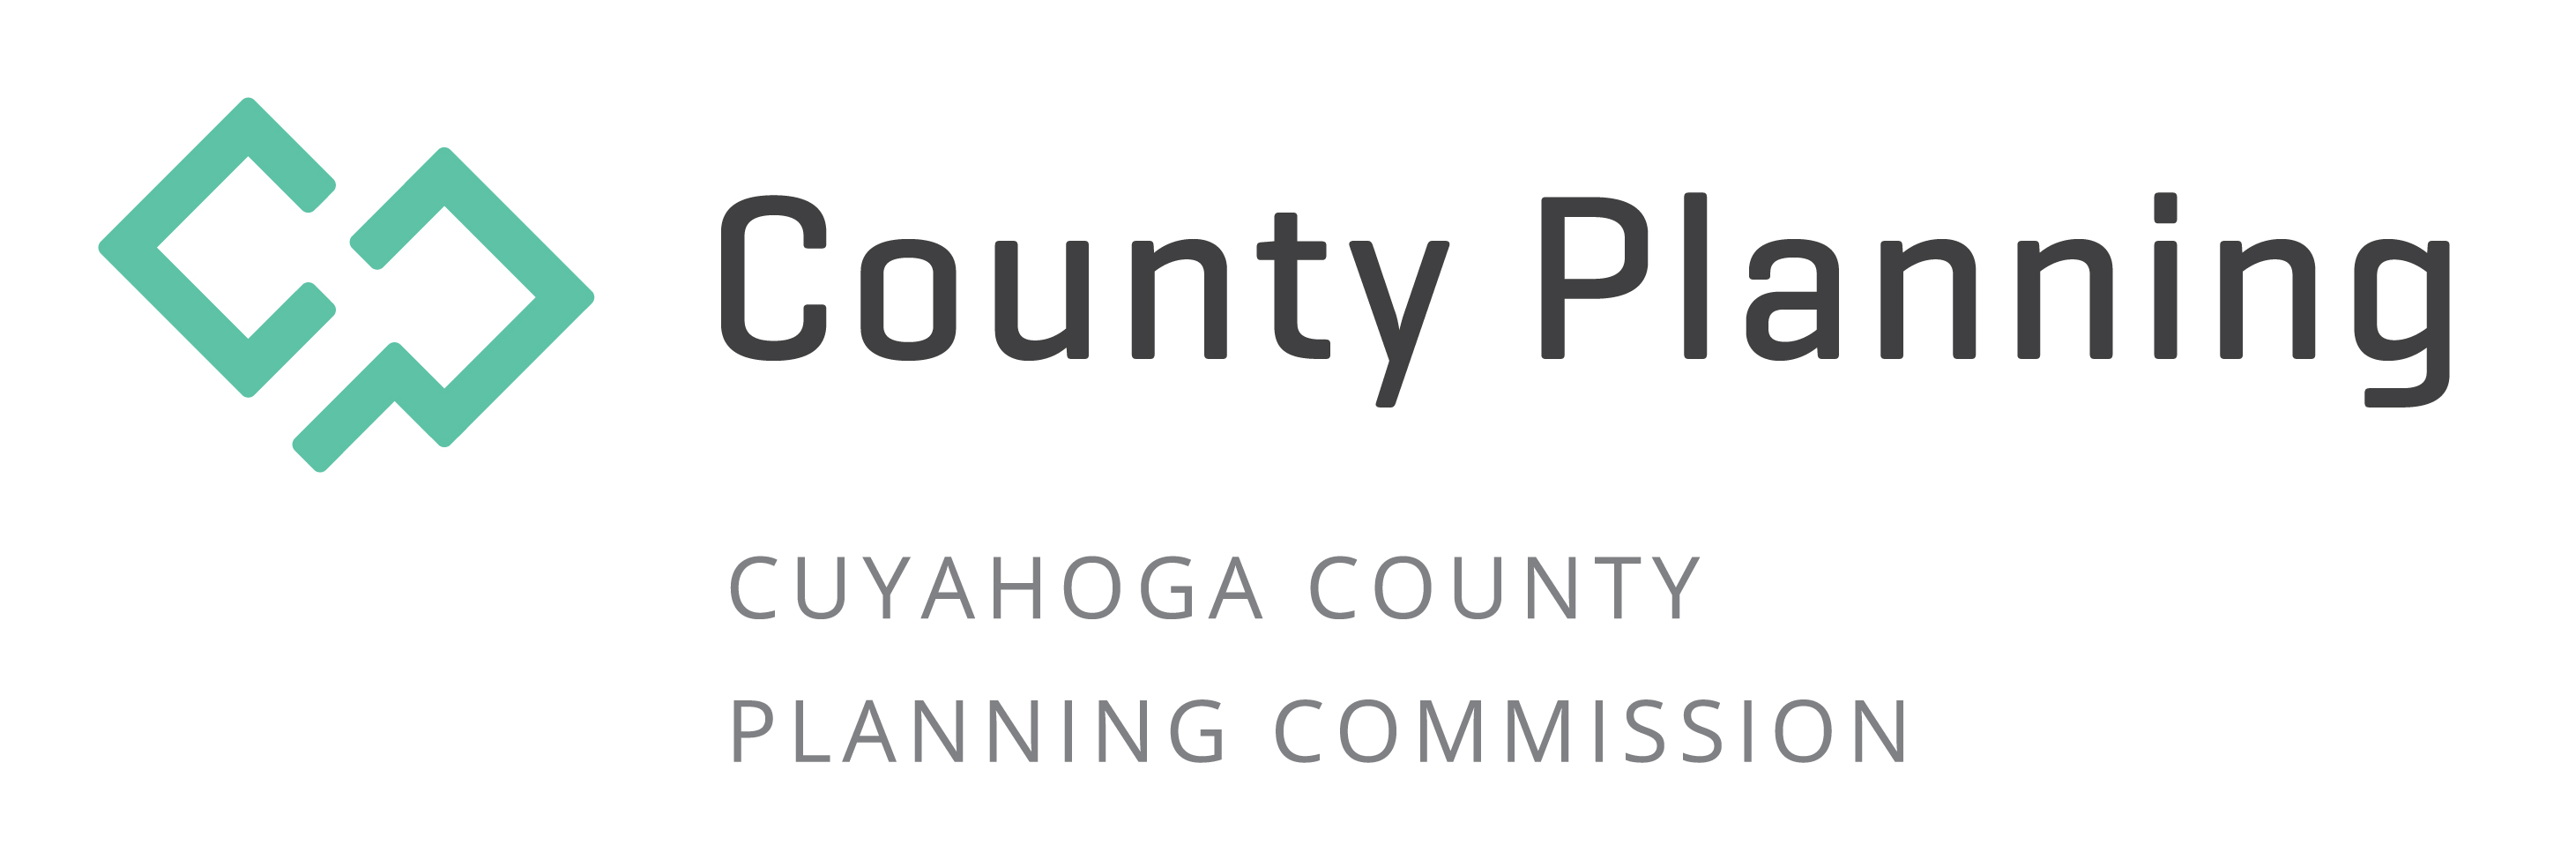 Cuyahoga County Planning Commission